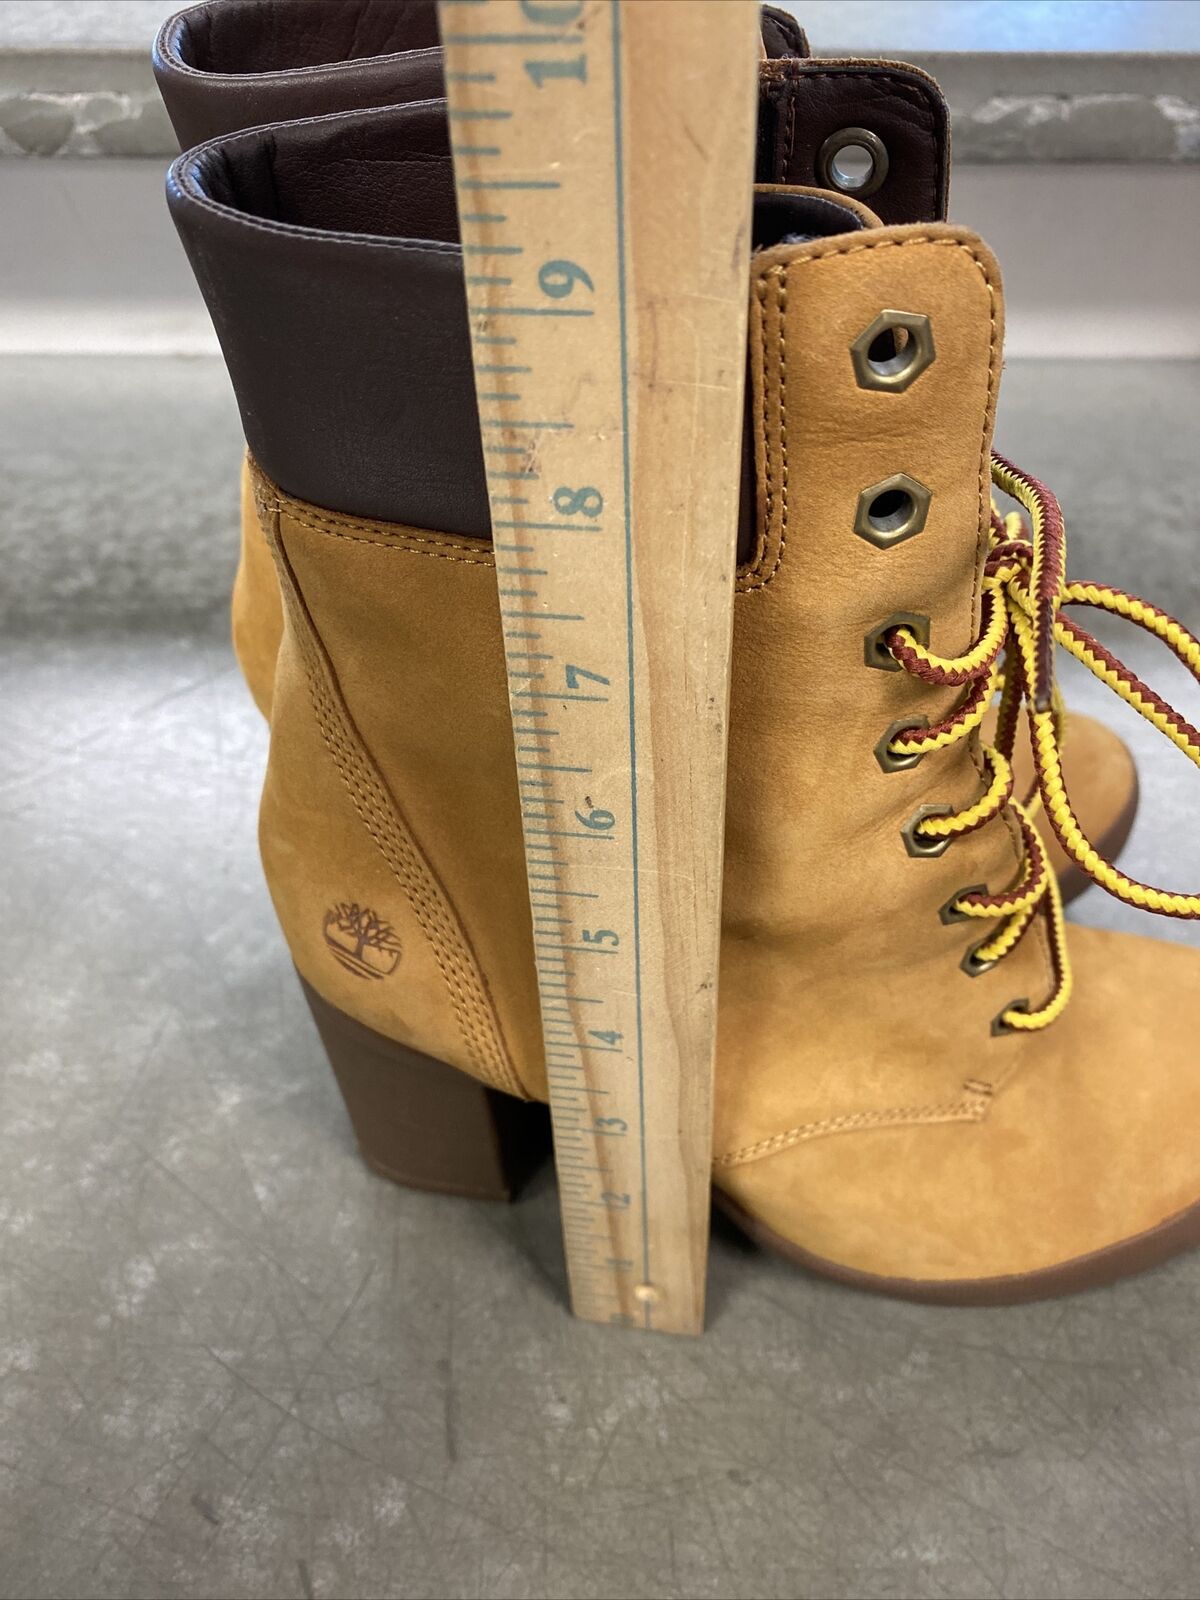 Comfort, Style, and a Little Wild: Women's Boots are Trending - Payless  Shoes Blog